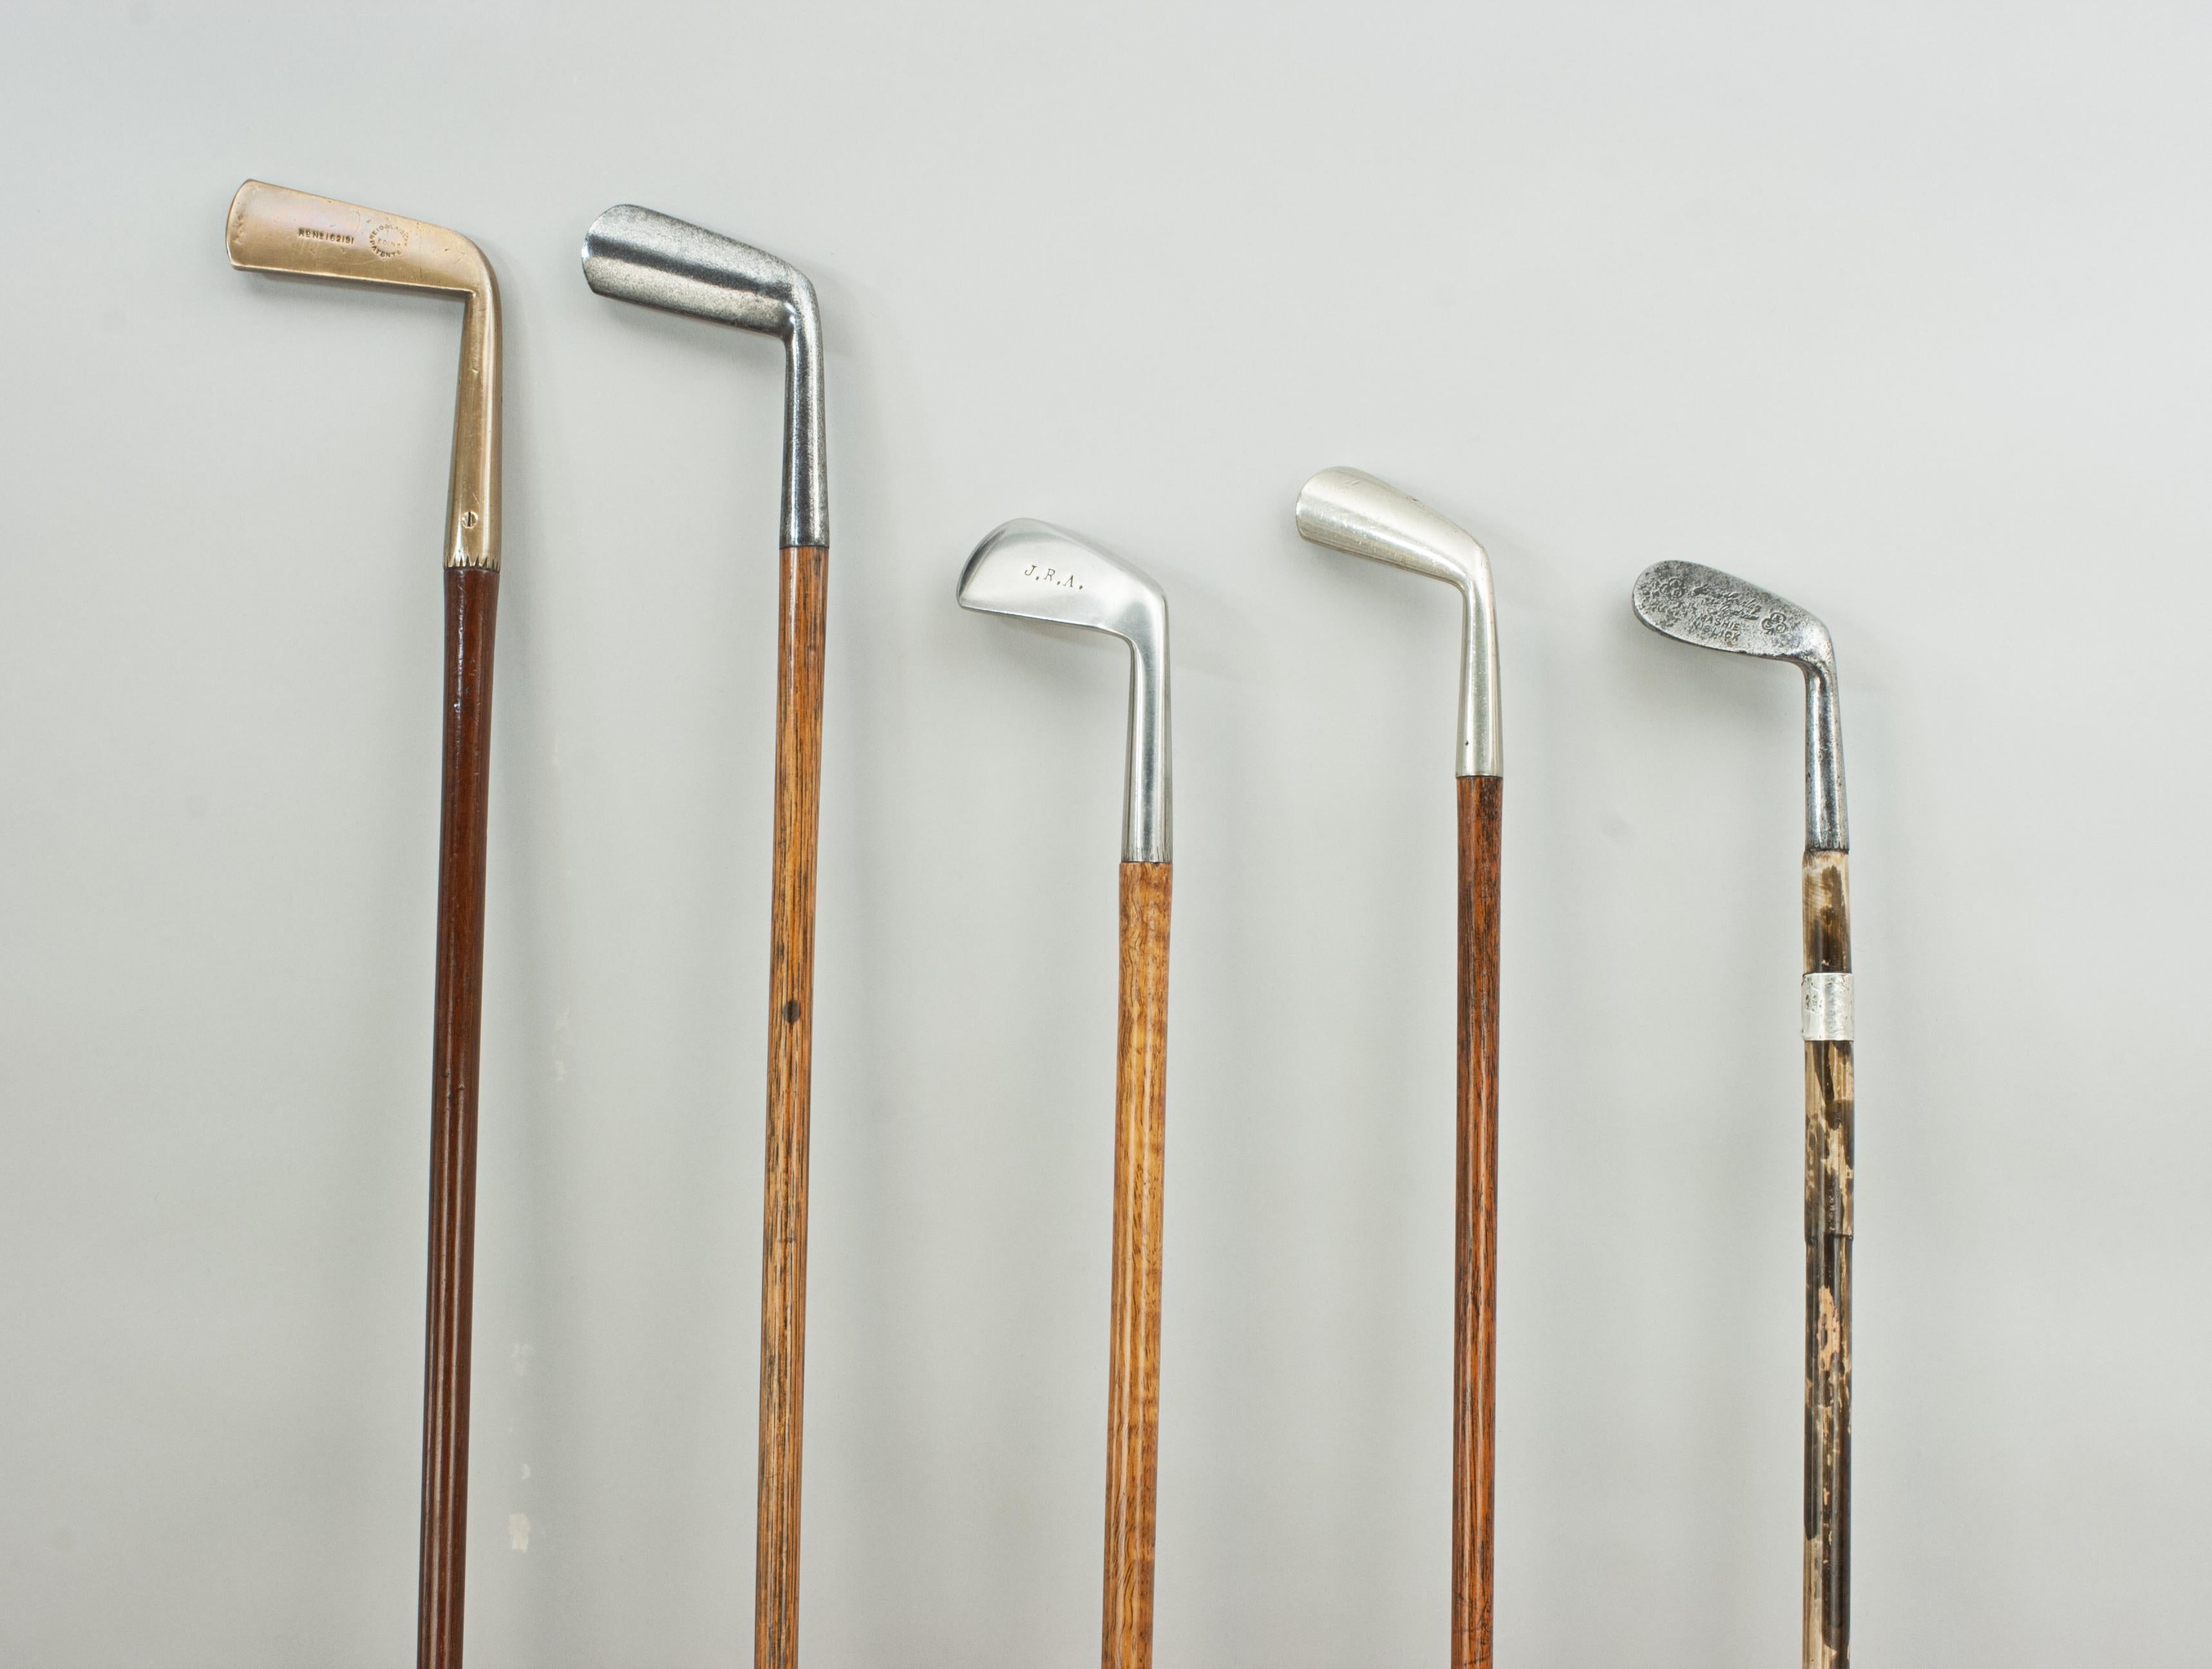 Hardwood Antique Golf Club Walking Stick Collection of 16 Canes, Sunday Clubs